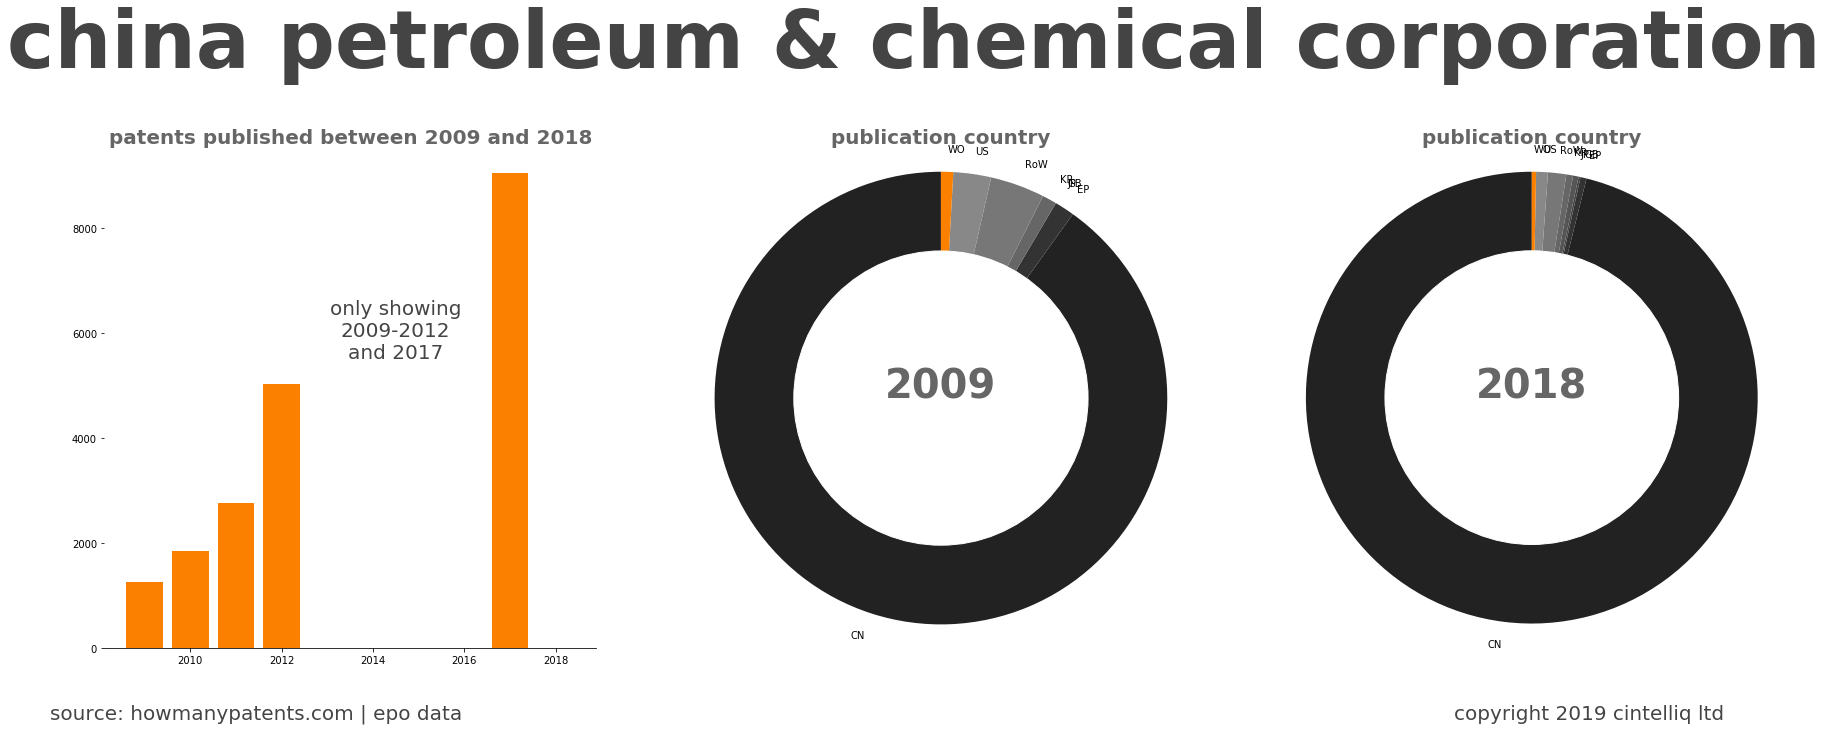 summary of patents for China Petroleum & Chemical Corporation